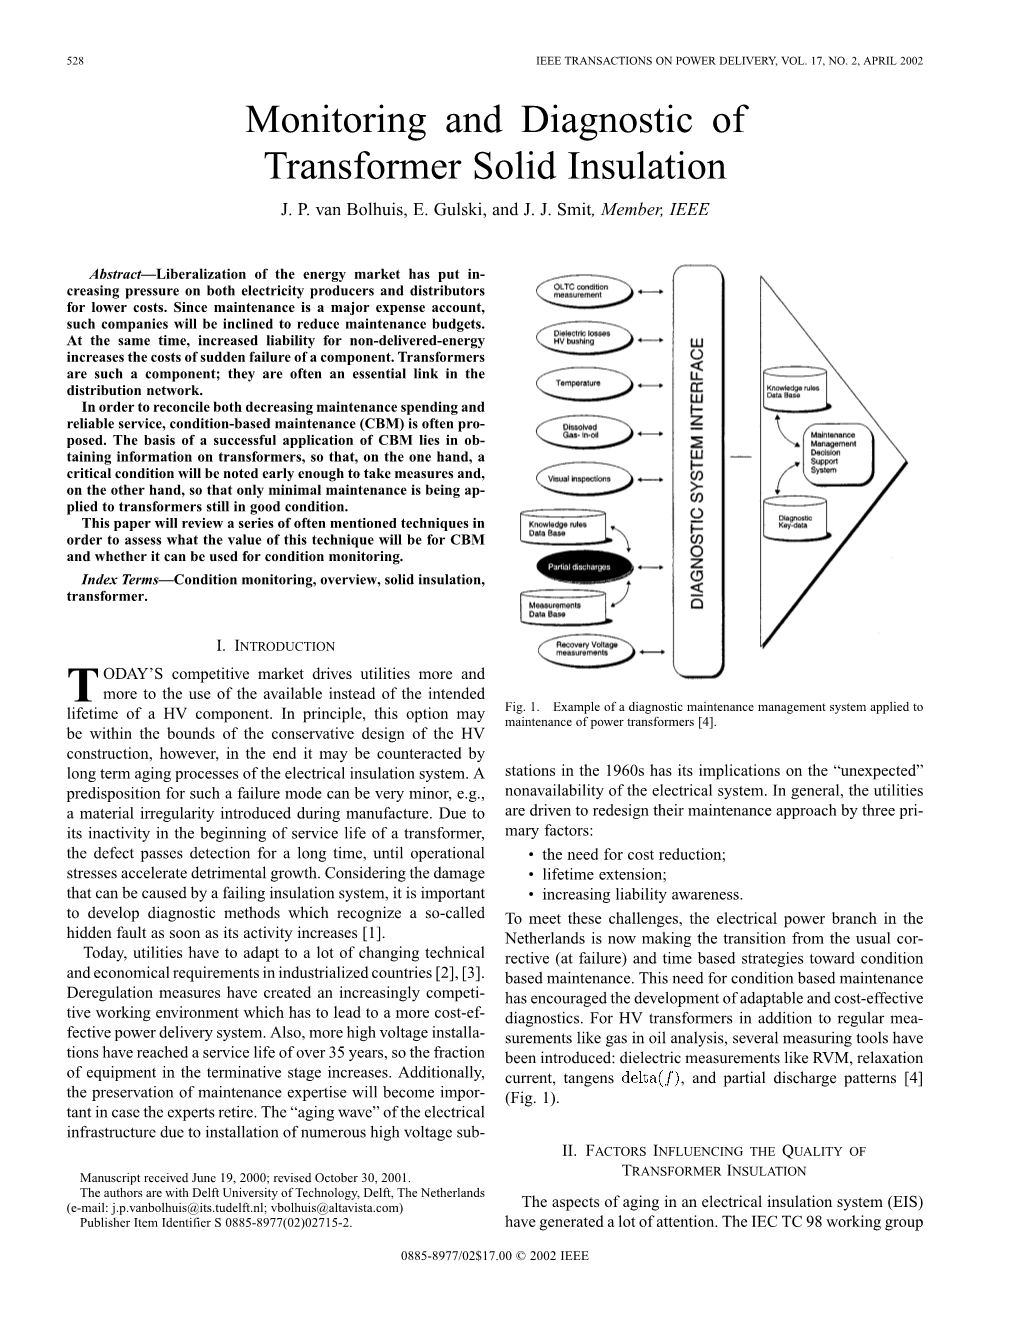 Monitoring and Diagnostic of Transformer Solid Insulation J